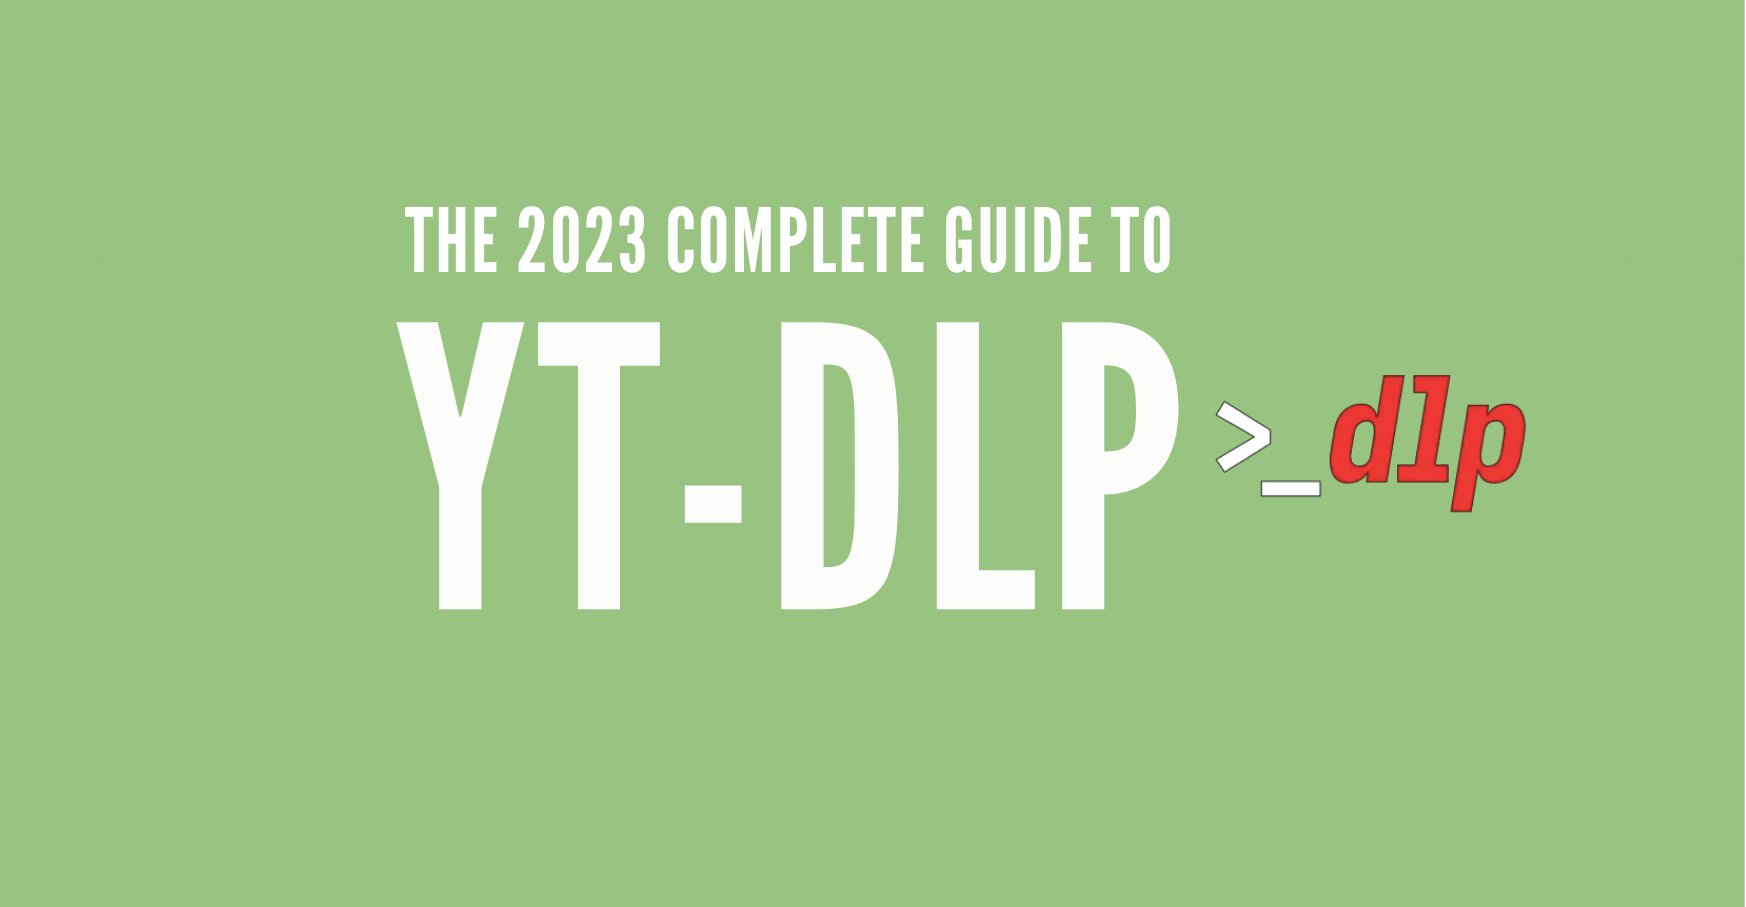 The complete guide to yt-dlp